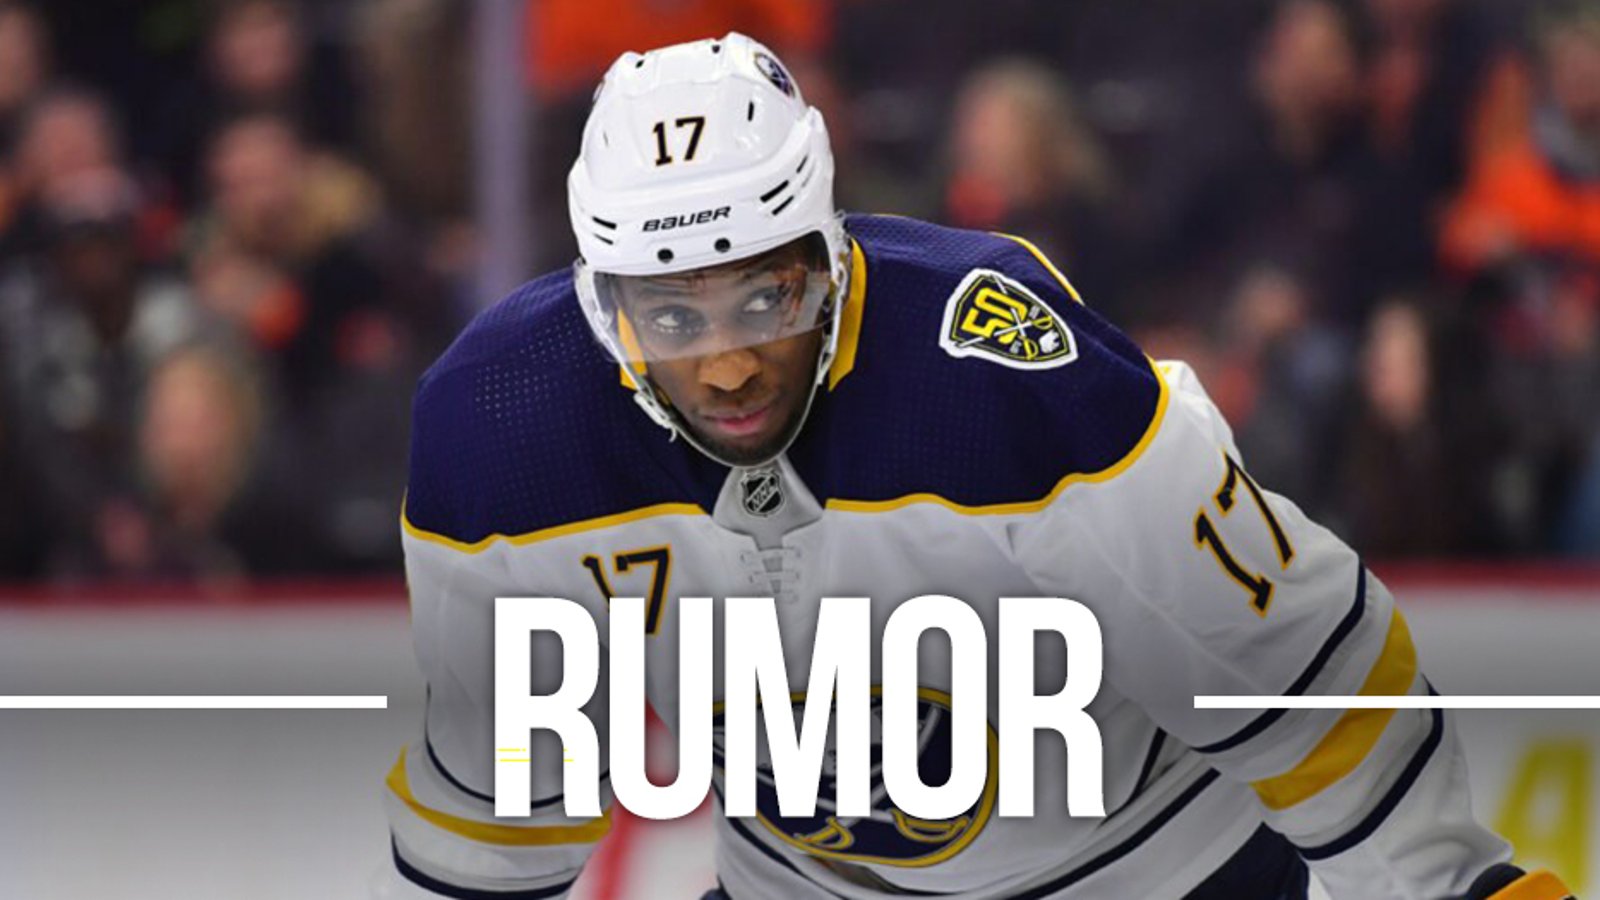 Free agent Wayne Simmonds hints at signing with the Leafs this offseason